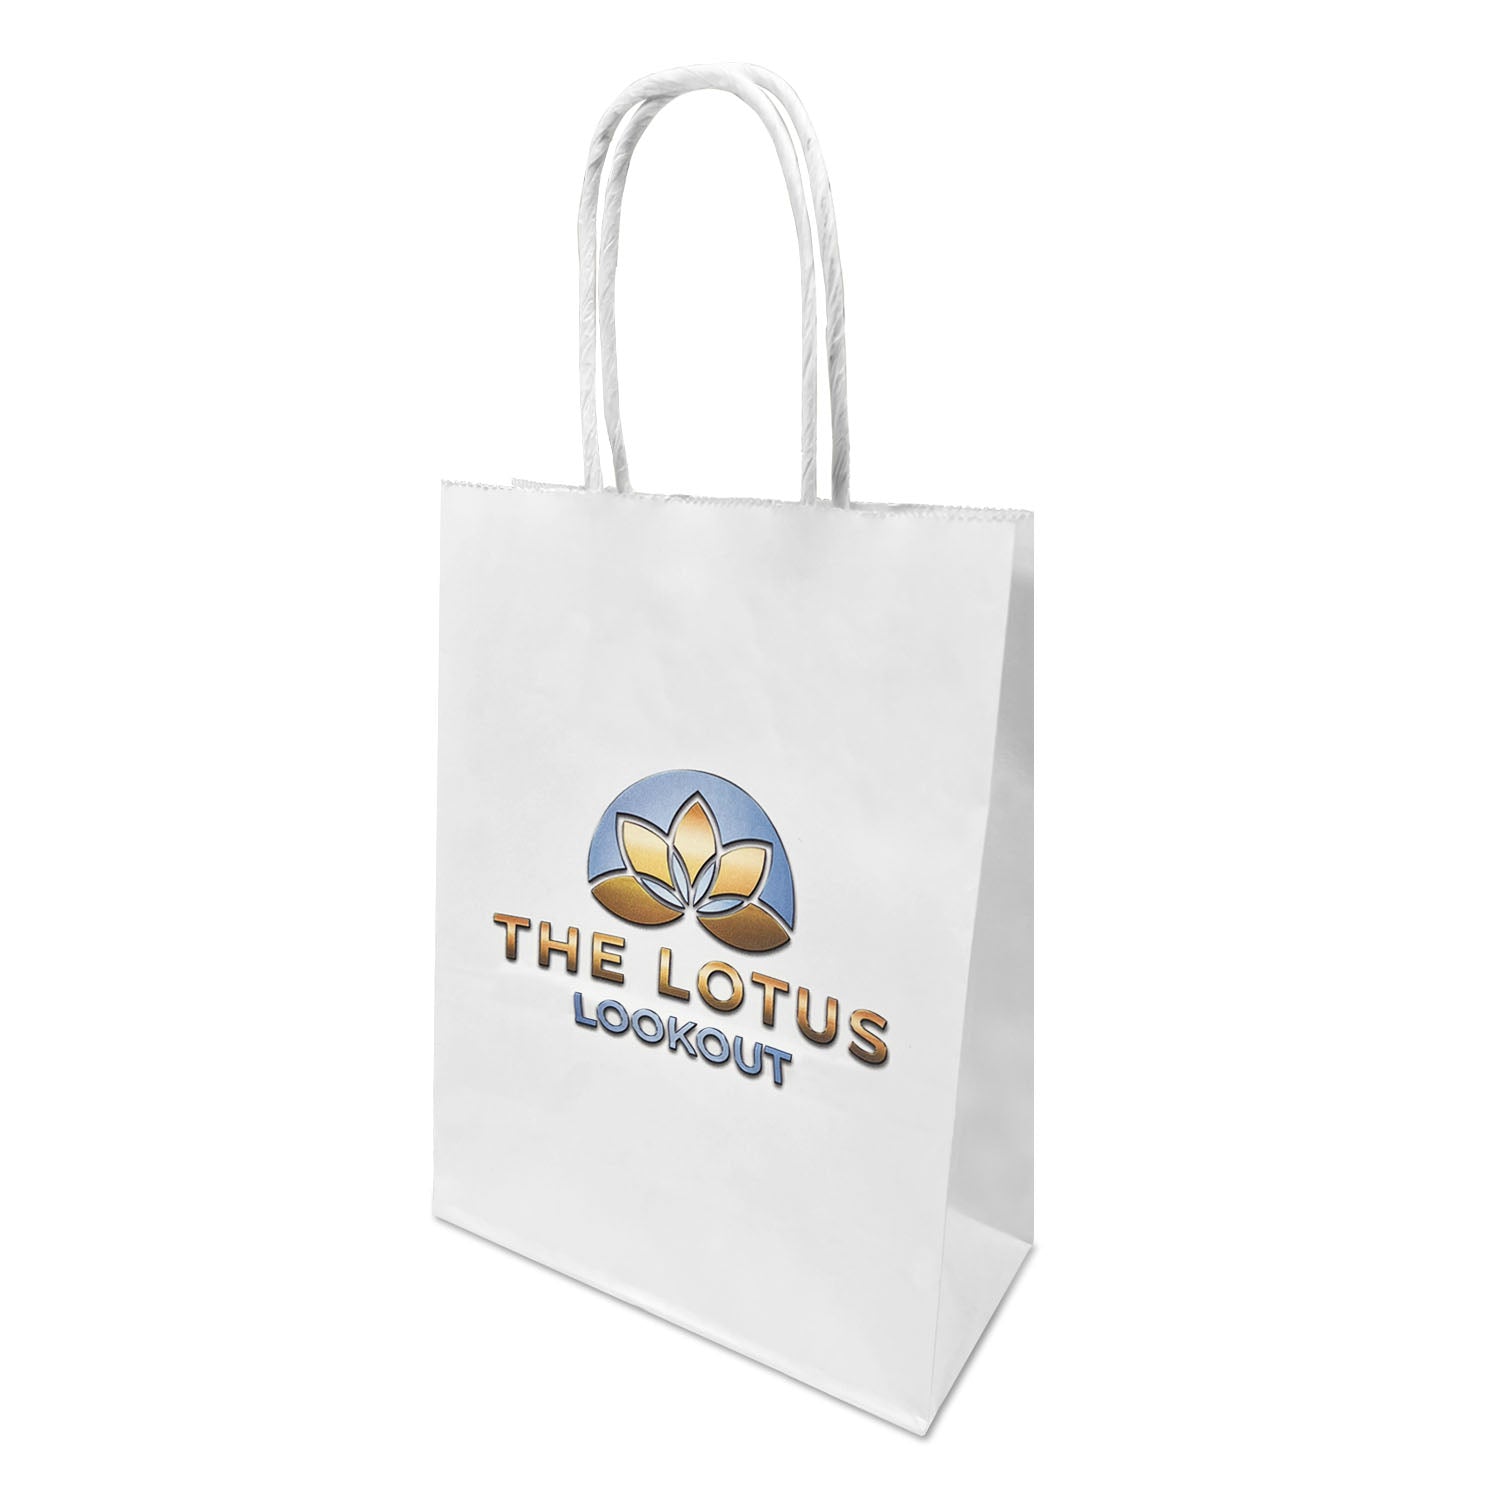 100 Pcs, Gem, 5.3x3.5x8.5 inches, White Paper Bags, with Twisted Handle, Full Color Custom Print